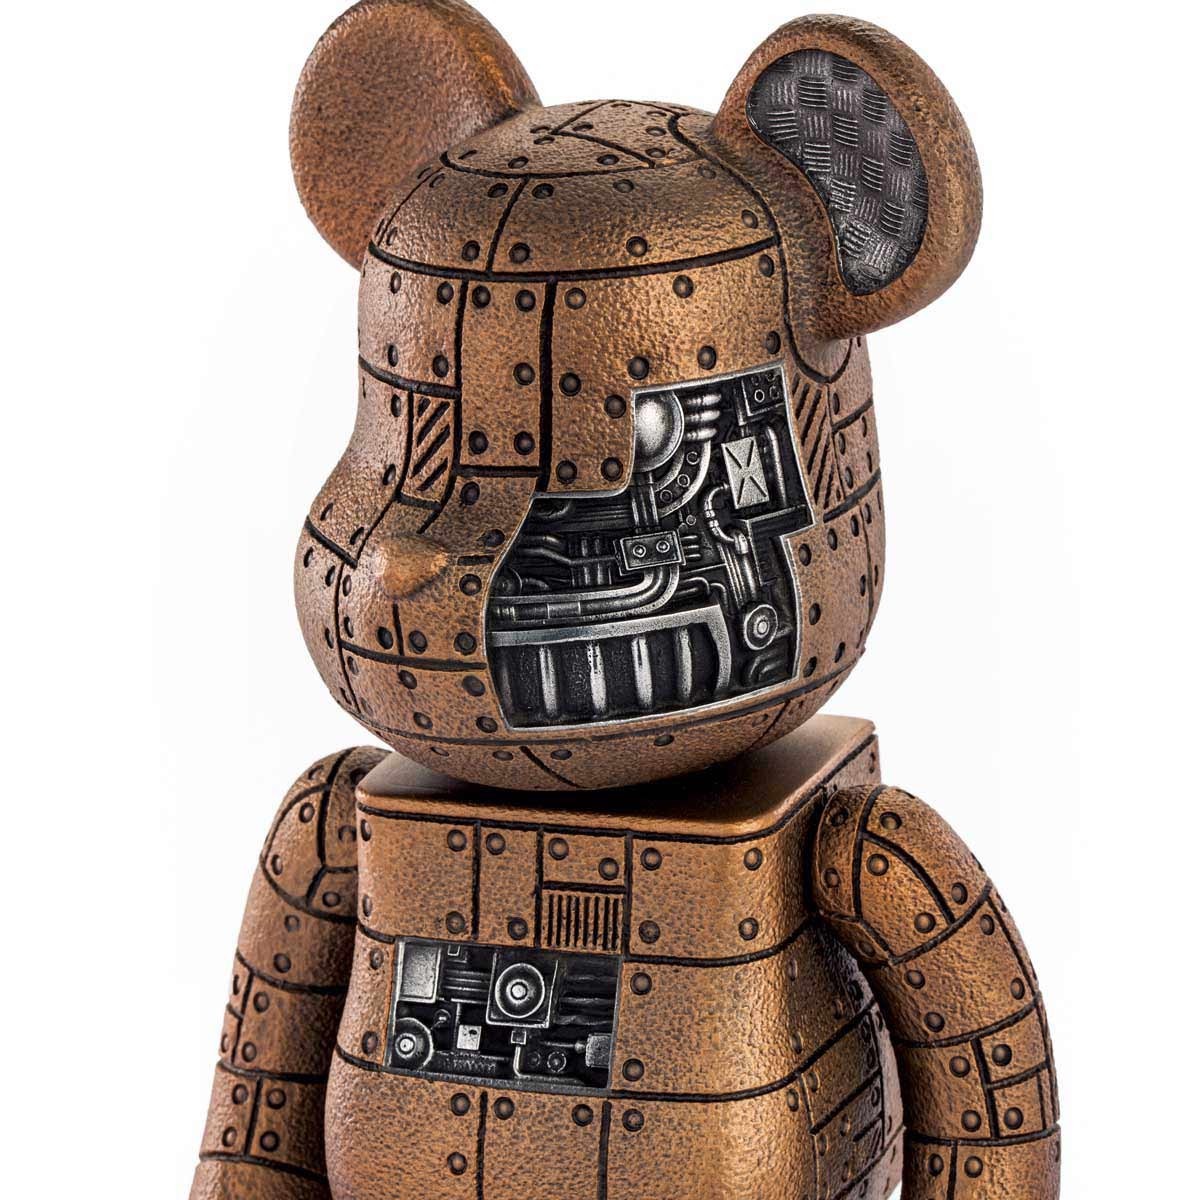 Special Edition Steampunk BE@RBRICK ROYAL SELANGOR